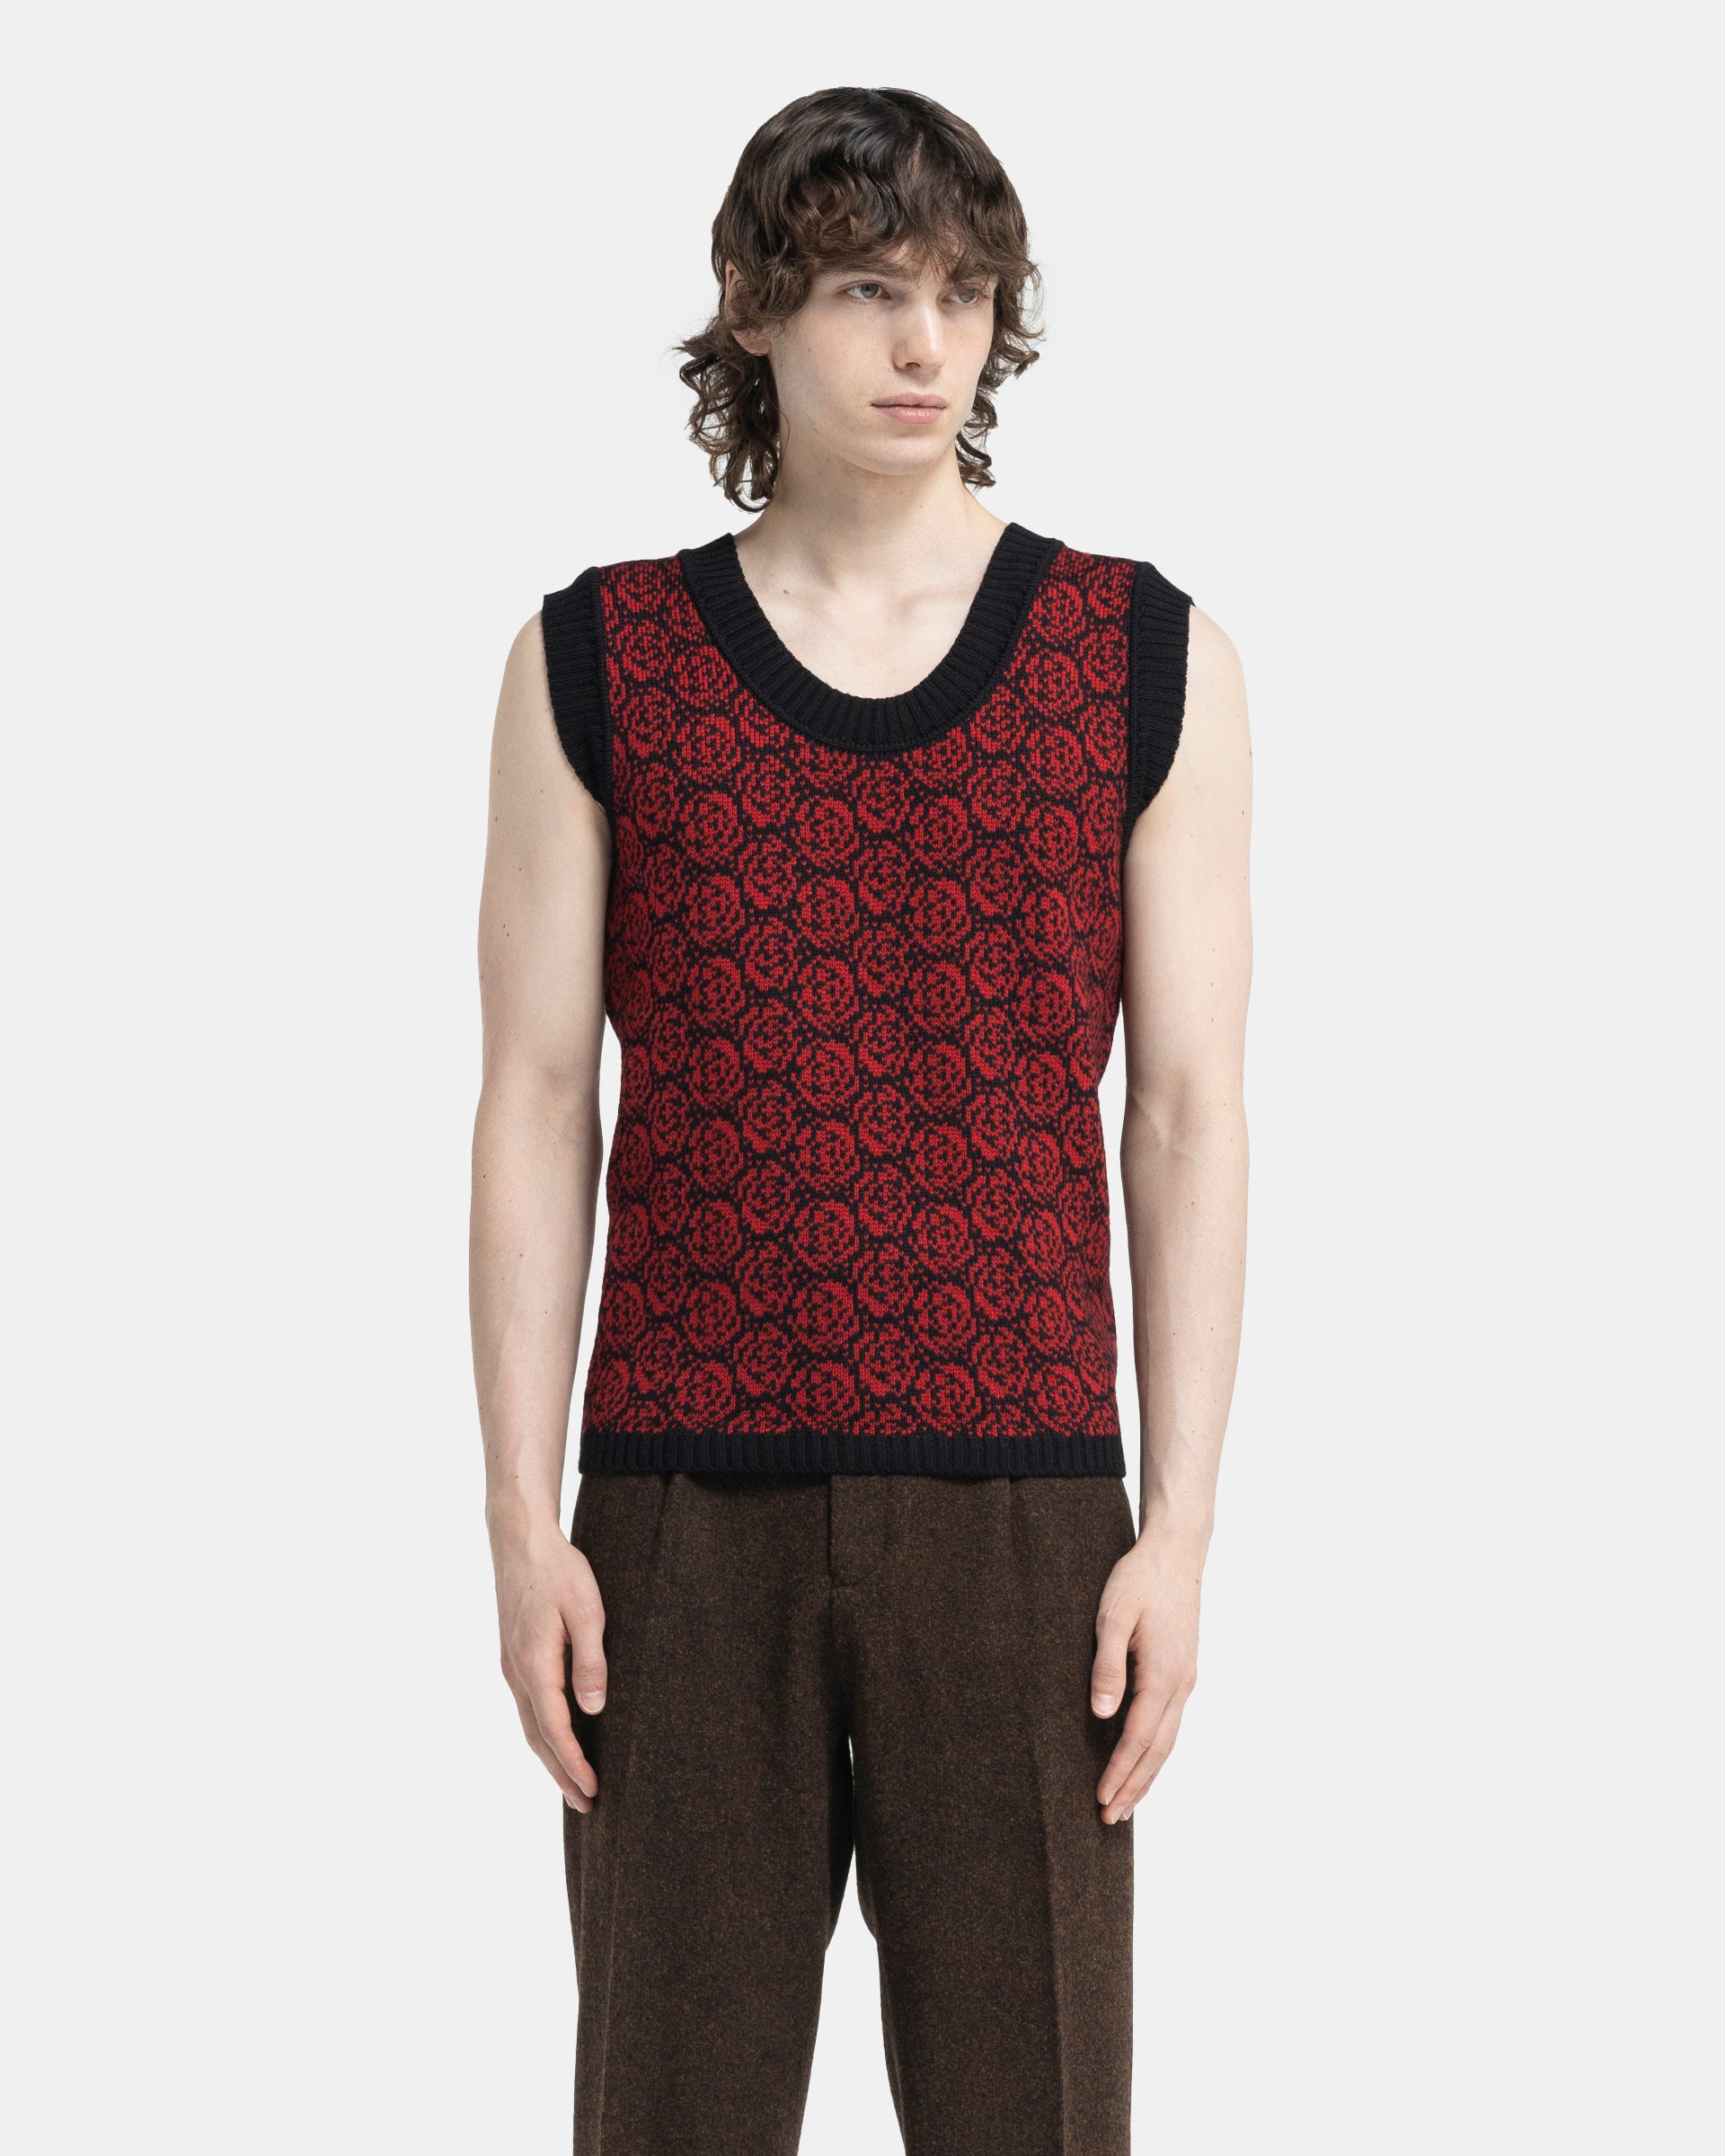 Rose Jacquard Tank Top in Black and red